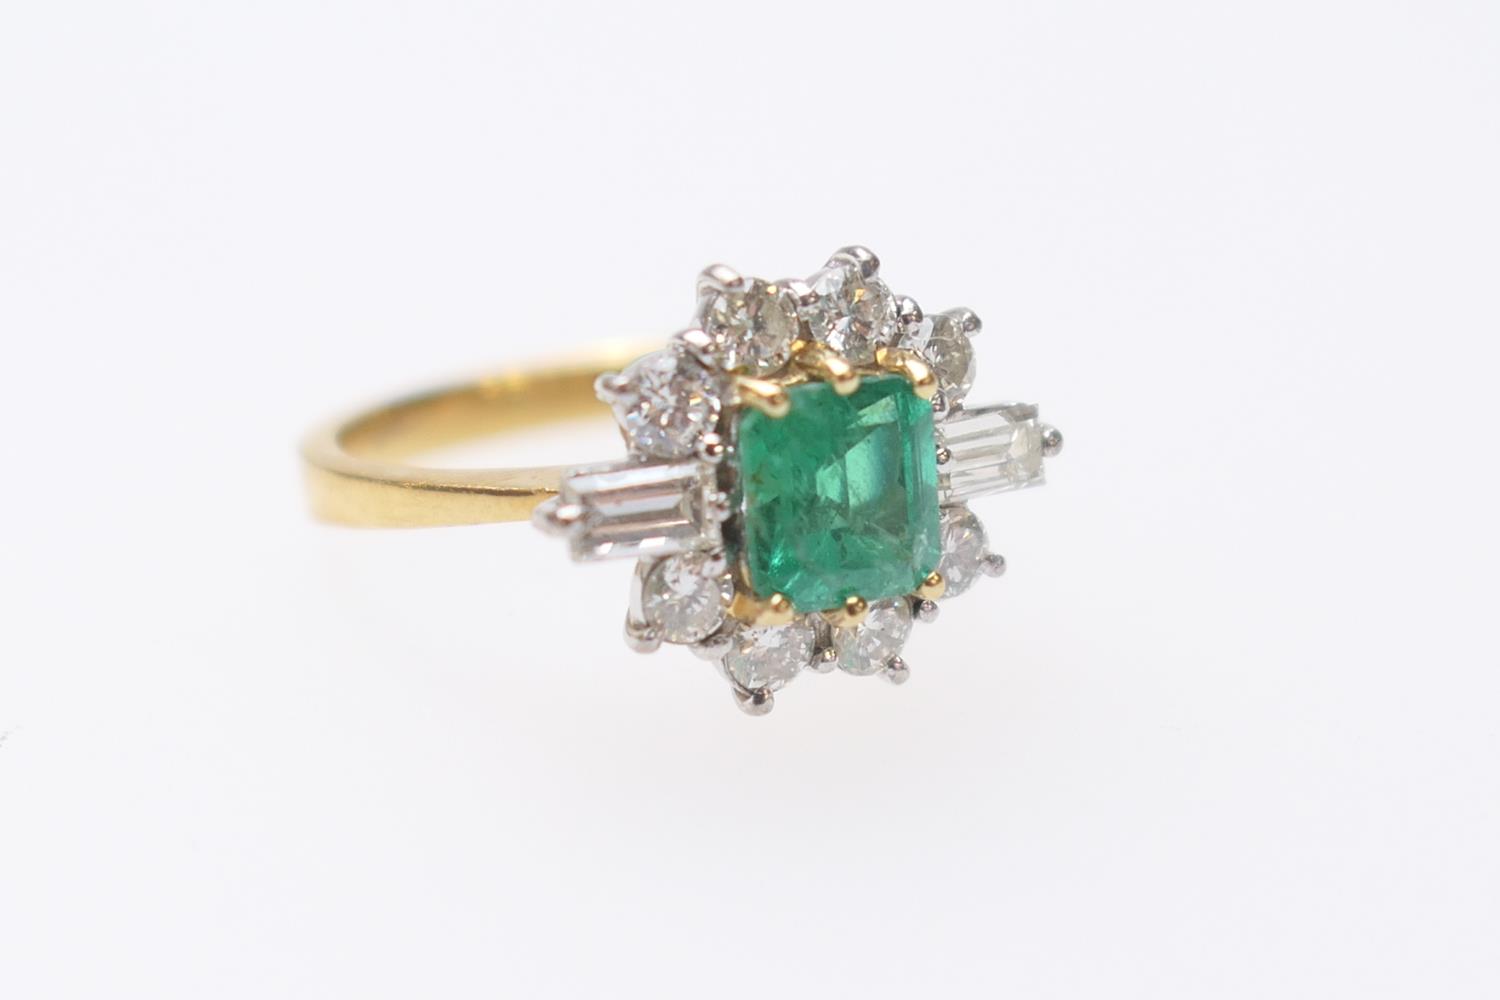 Emerald and diamond cluster ring, square cut emerald of approx. 1ct, flanked by two baguette